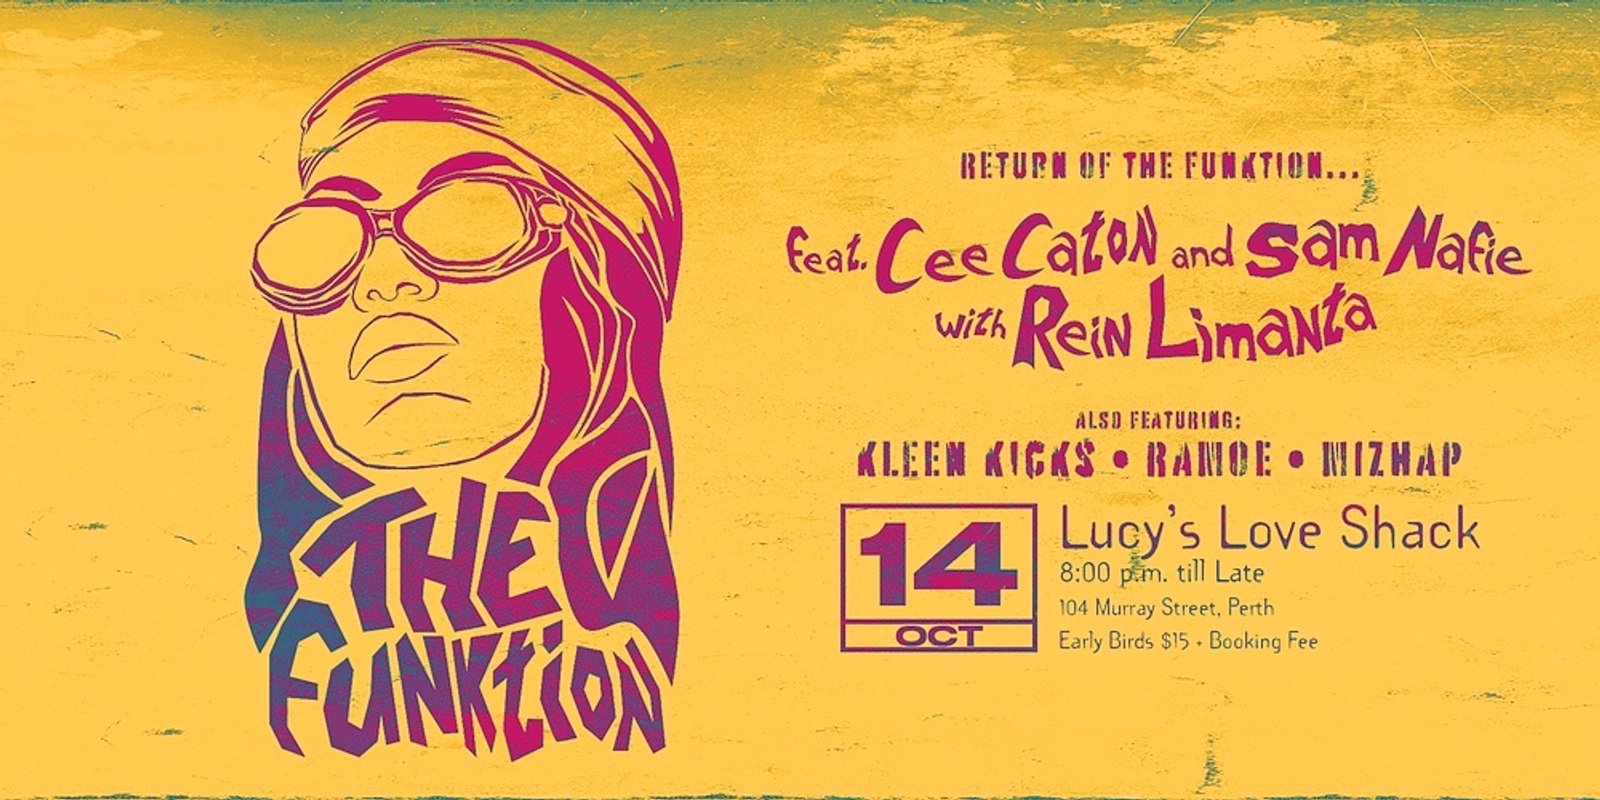 Banner image for The Funktion Returns - A night of R&B Classics